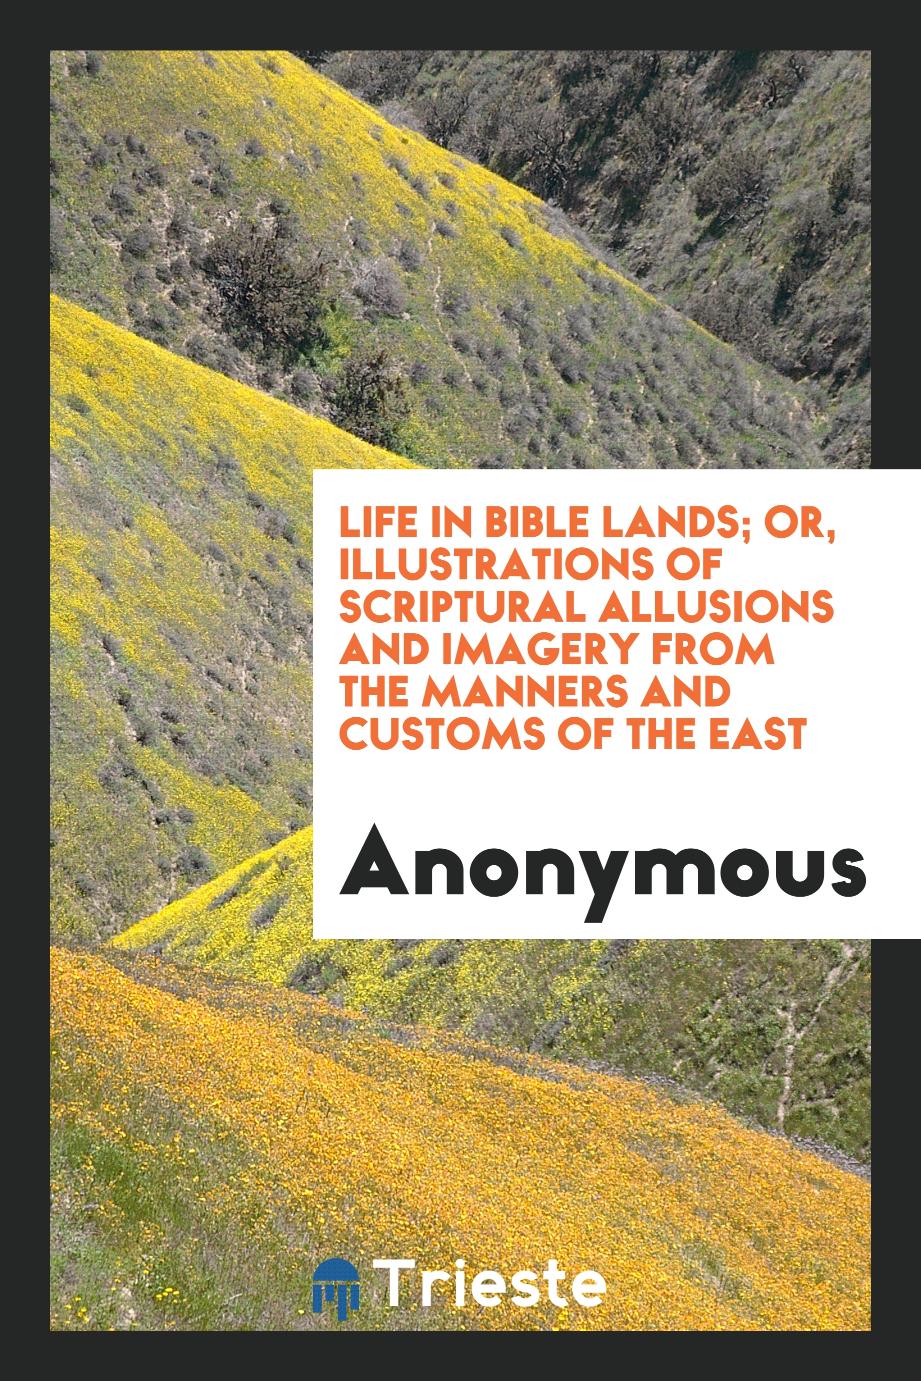 Life in Bible lands; or, Illustrations of Scriptural allusions and imagery from the manners and customs of the East